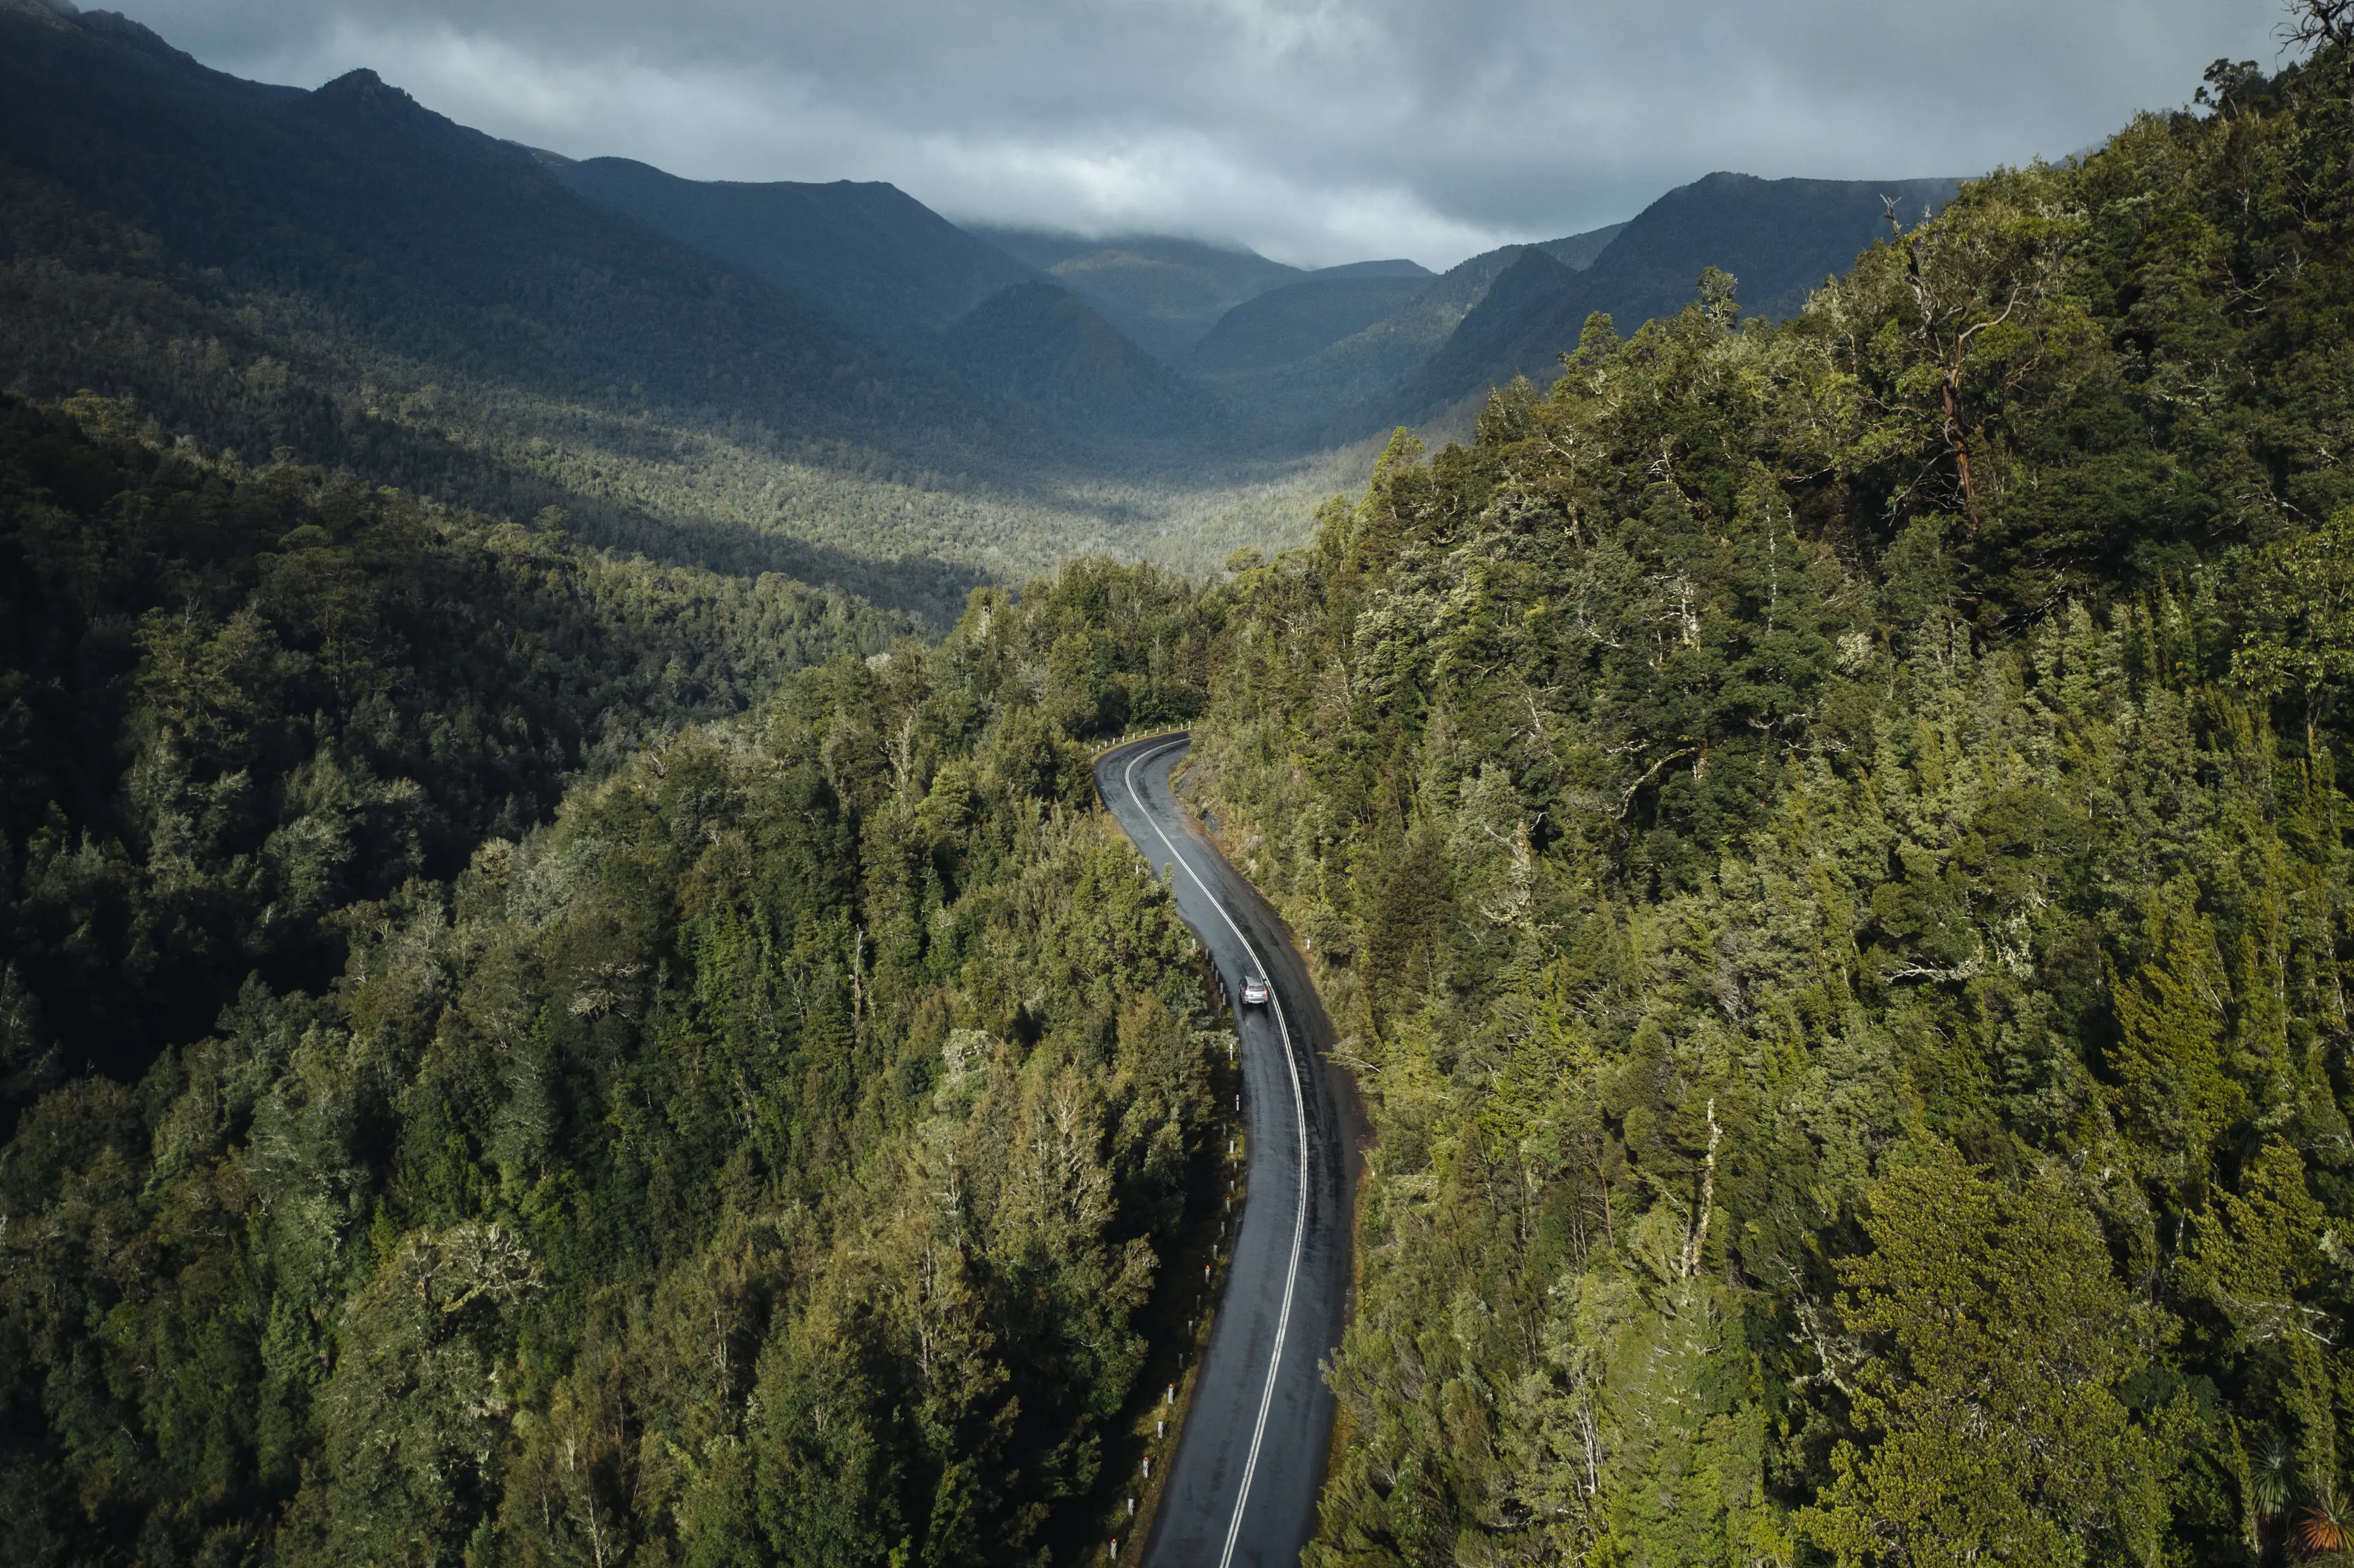 Breathtaking aerial image of a car driving through Surprise Valley, Lyell Highway, surrounded by lush forest and mountains.